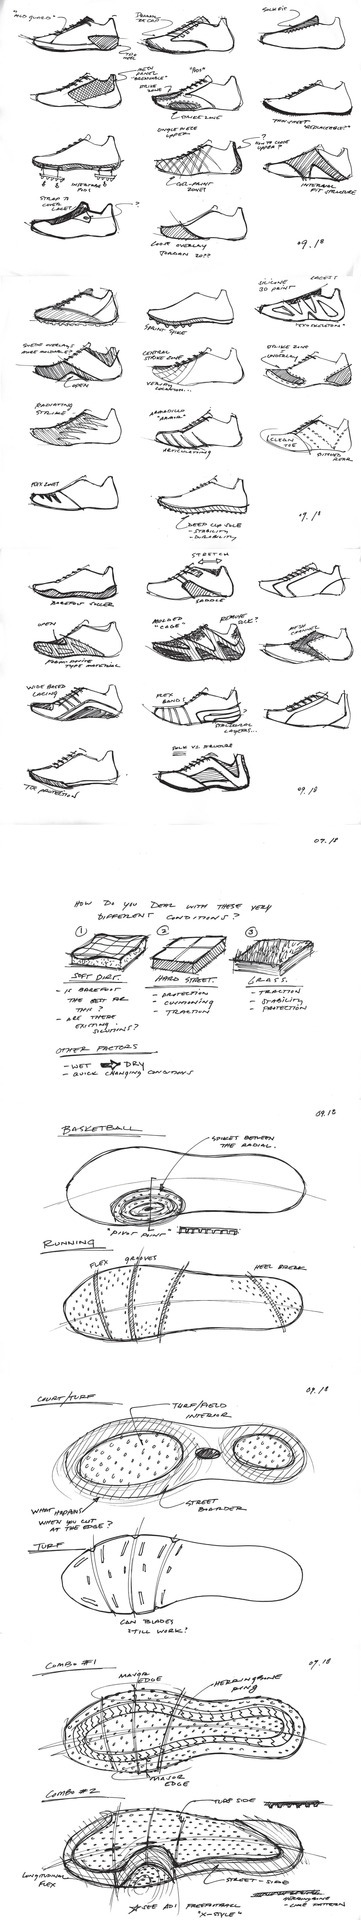 Early Sketches - image 1 - student project